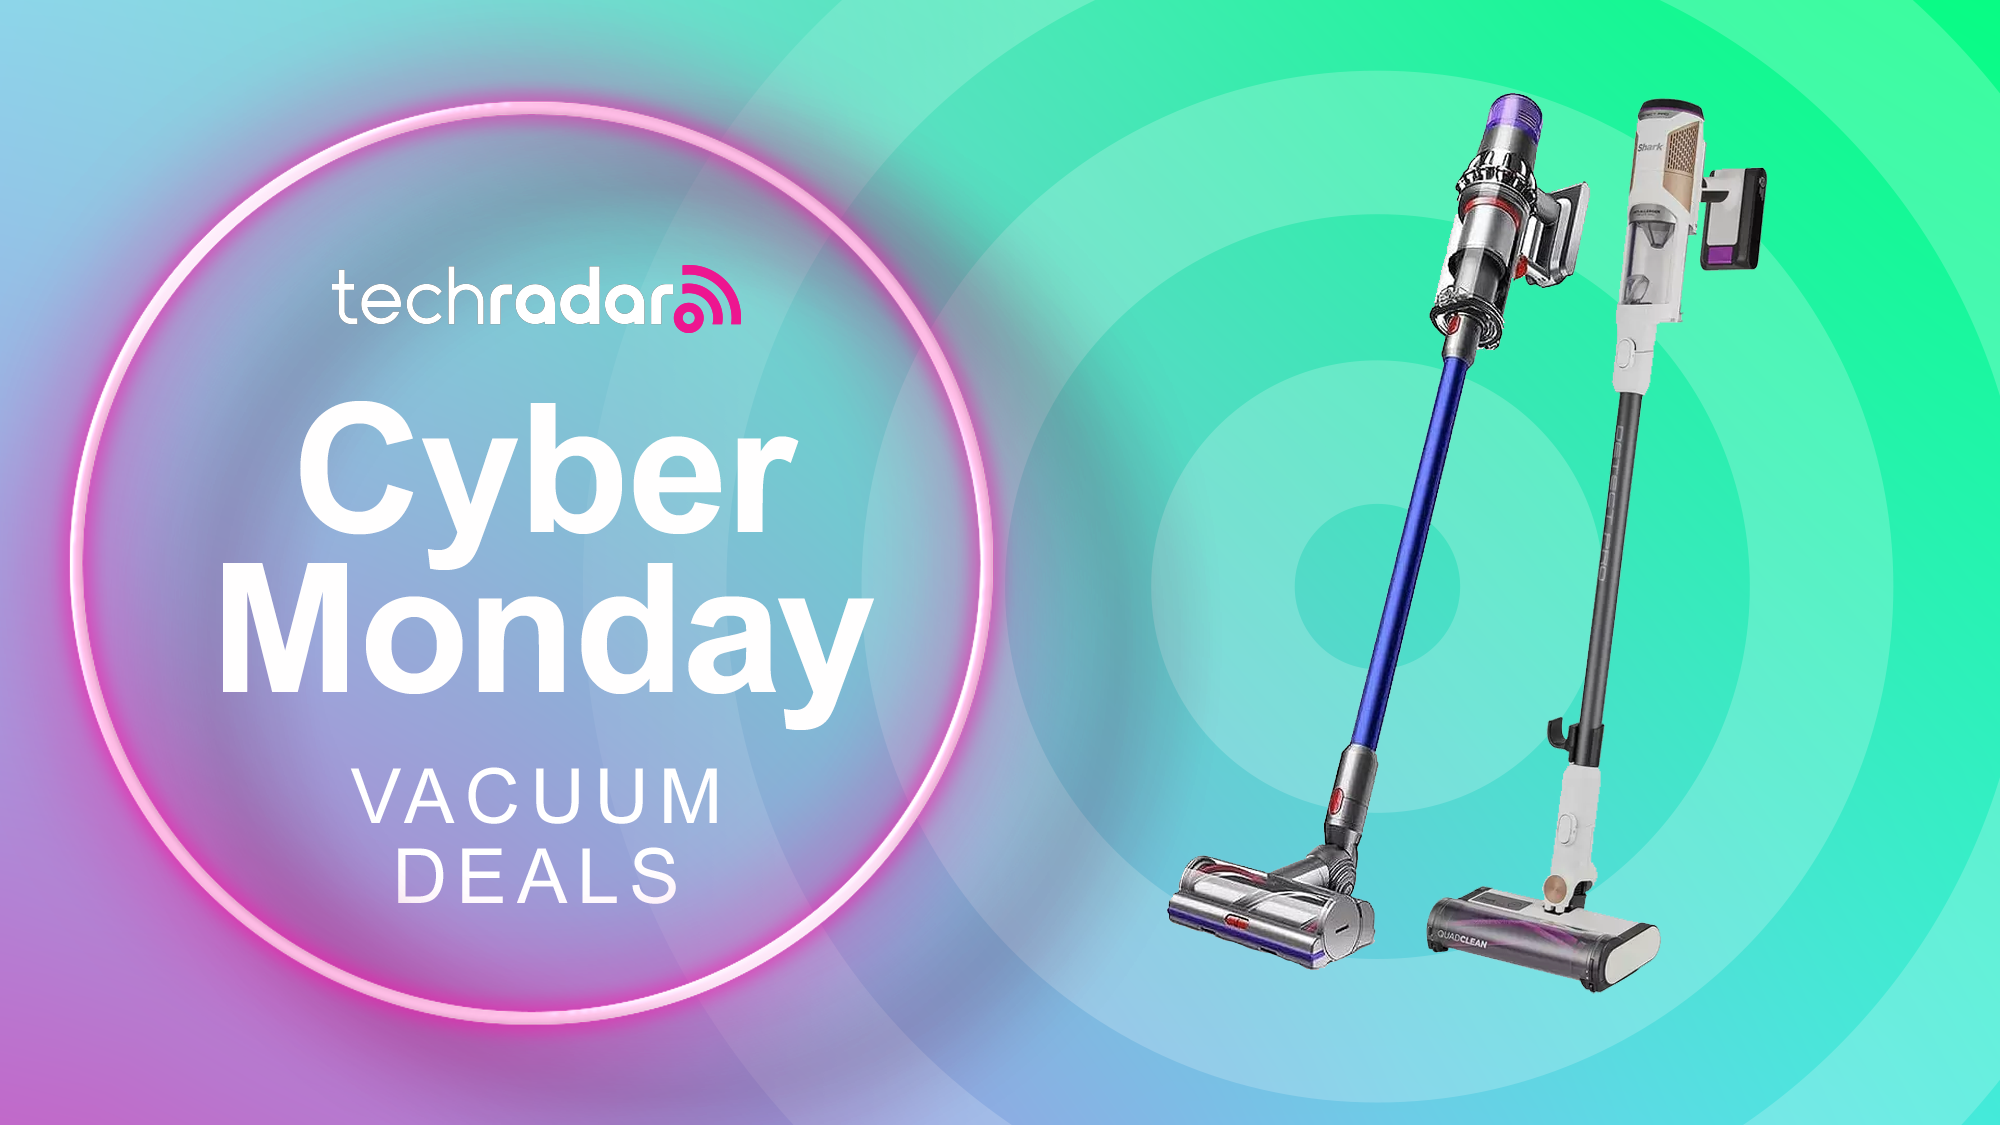 Cordless Vacuums Are Up to $450 Off at  Ahead of Cyber Monday